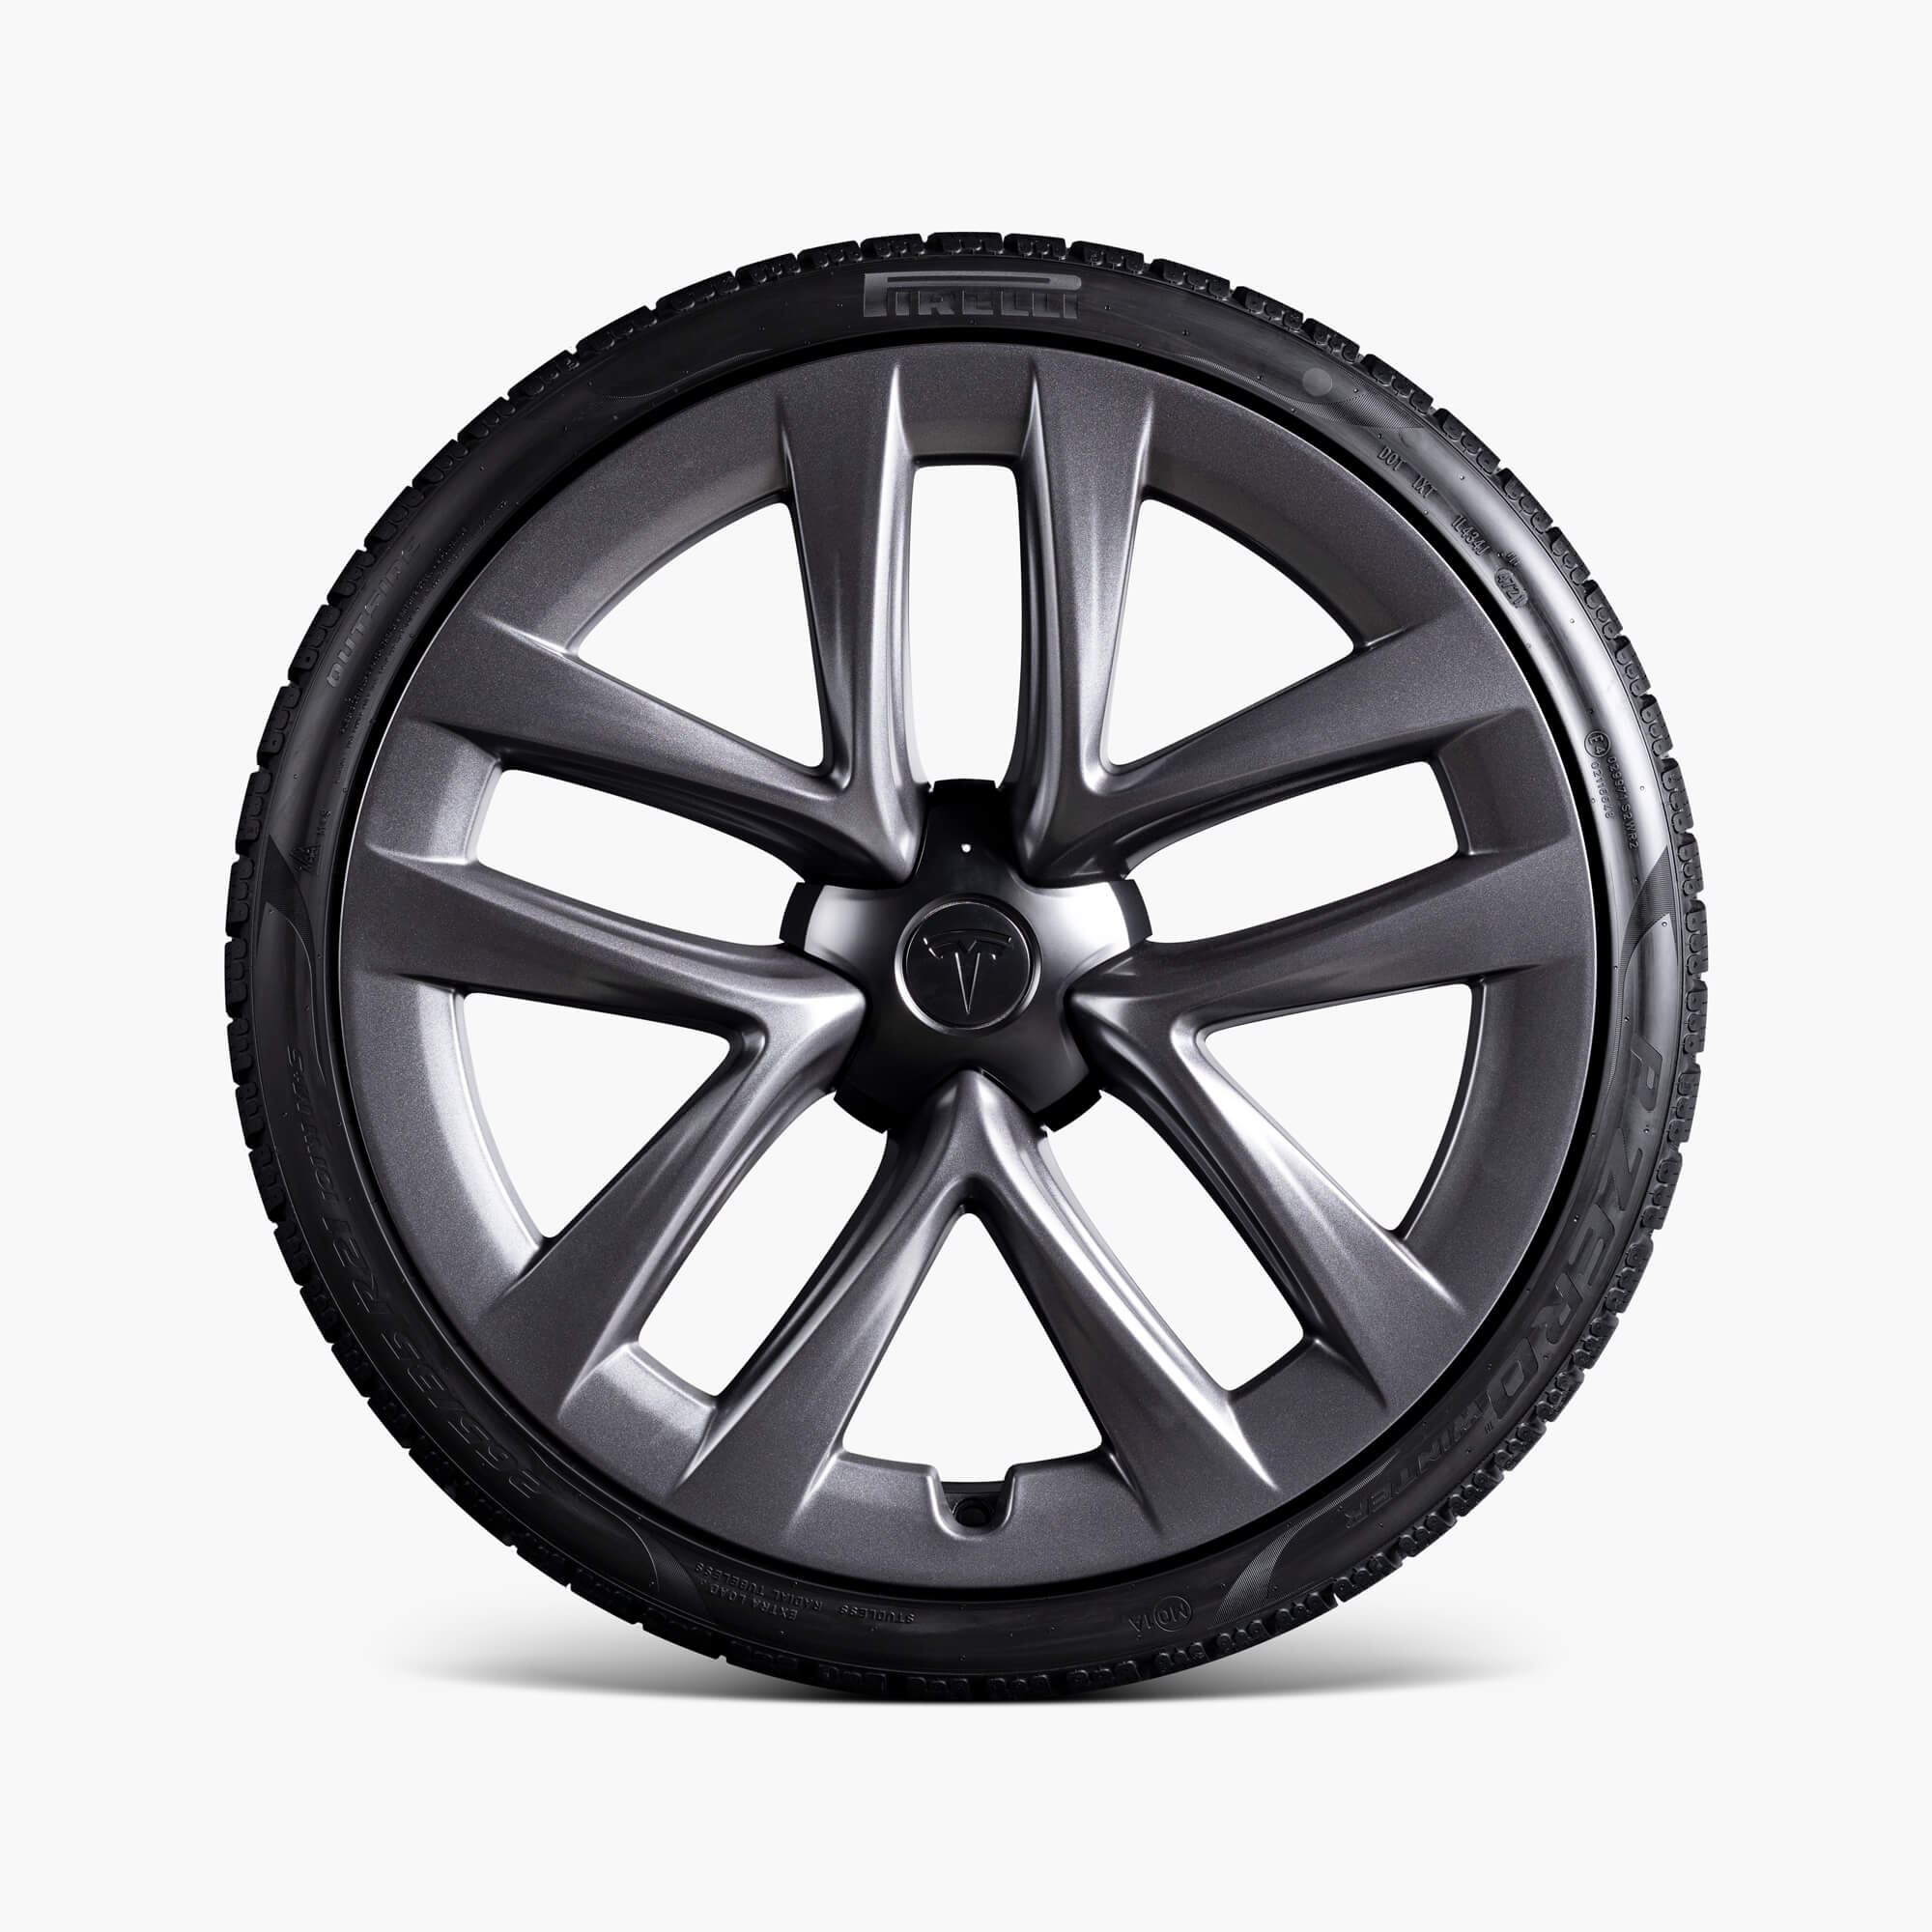 Model S 21" Arachnid Wheel and Winter Tire Package